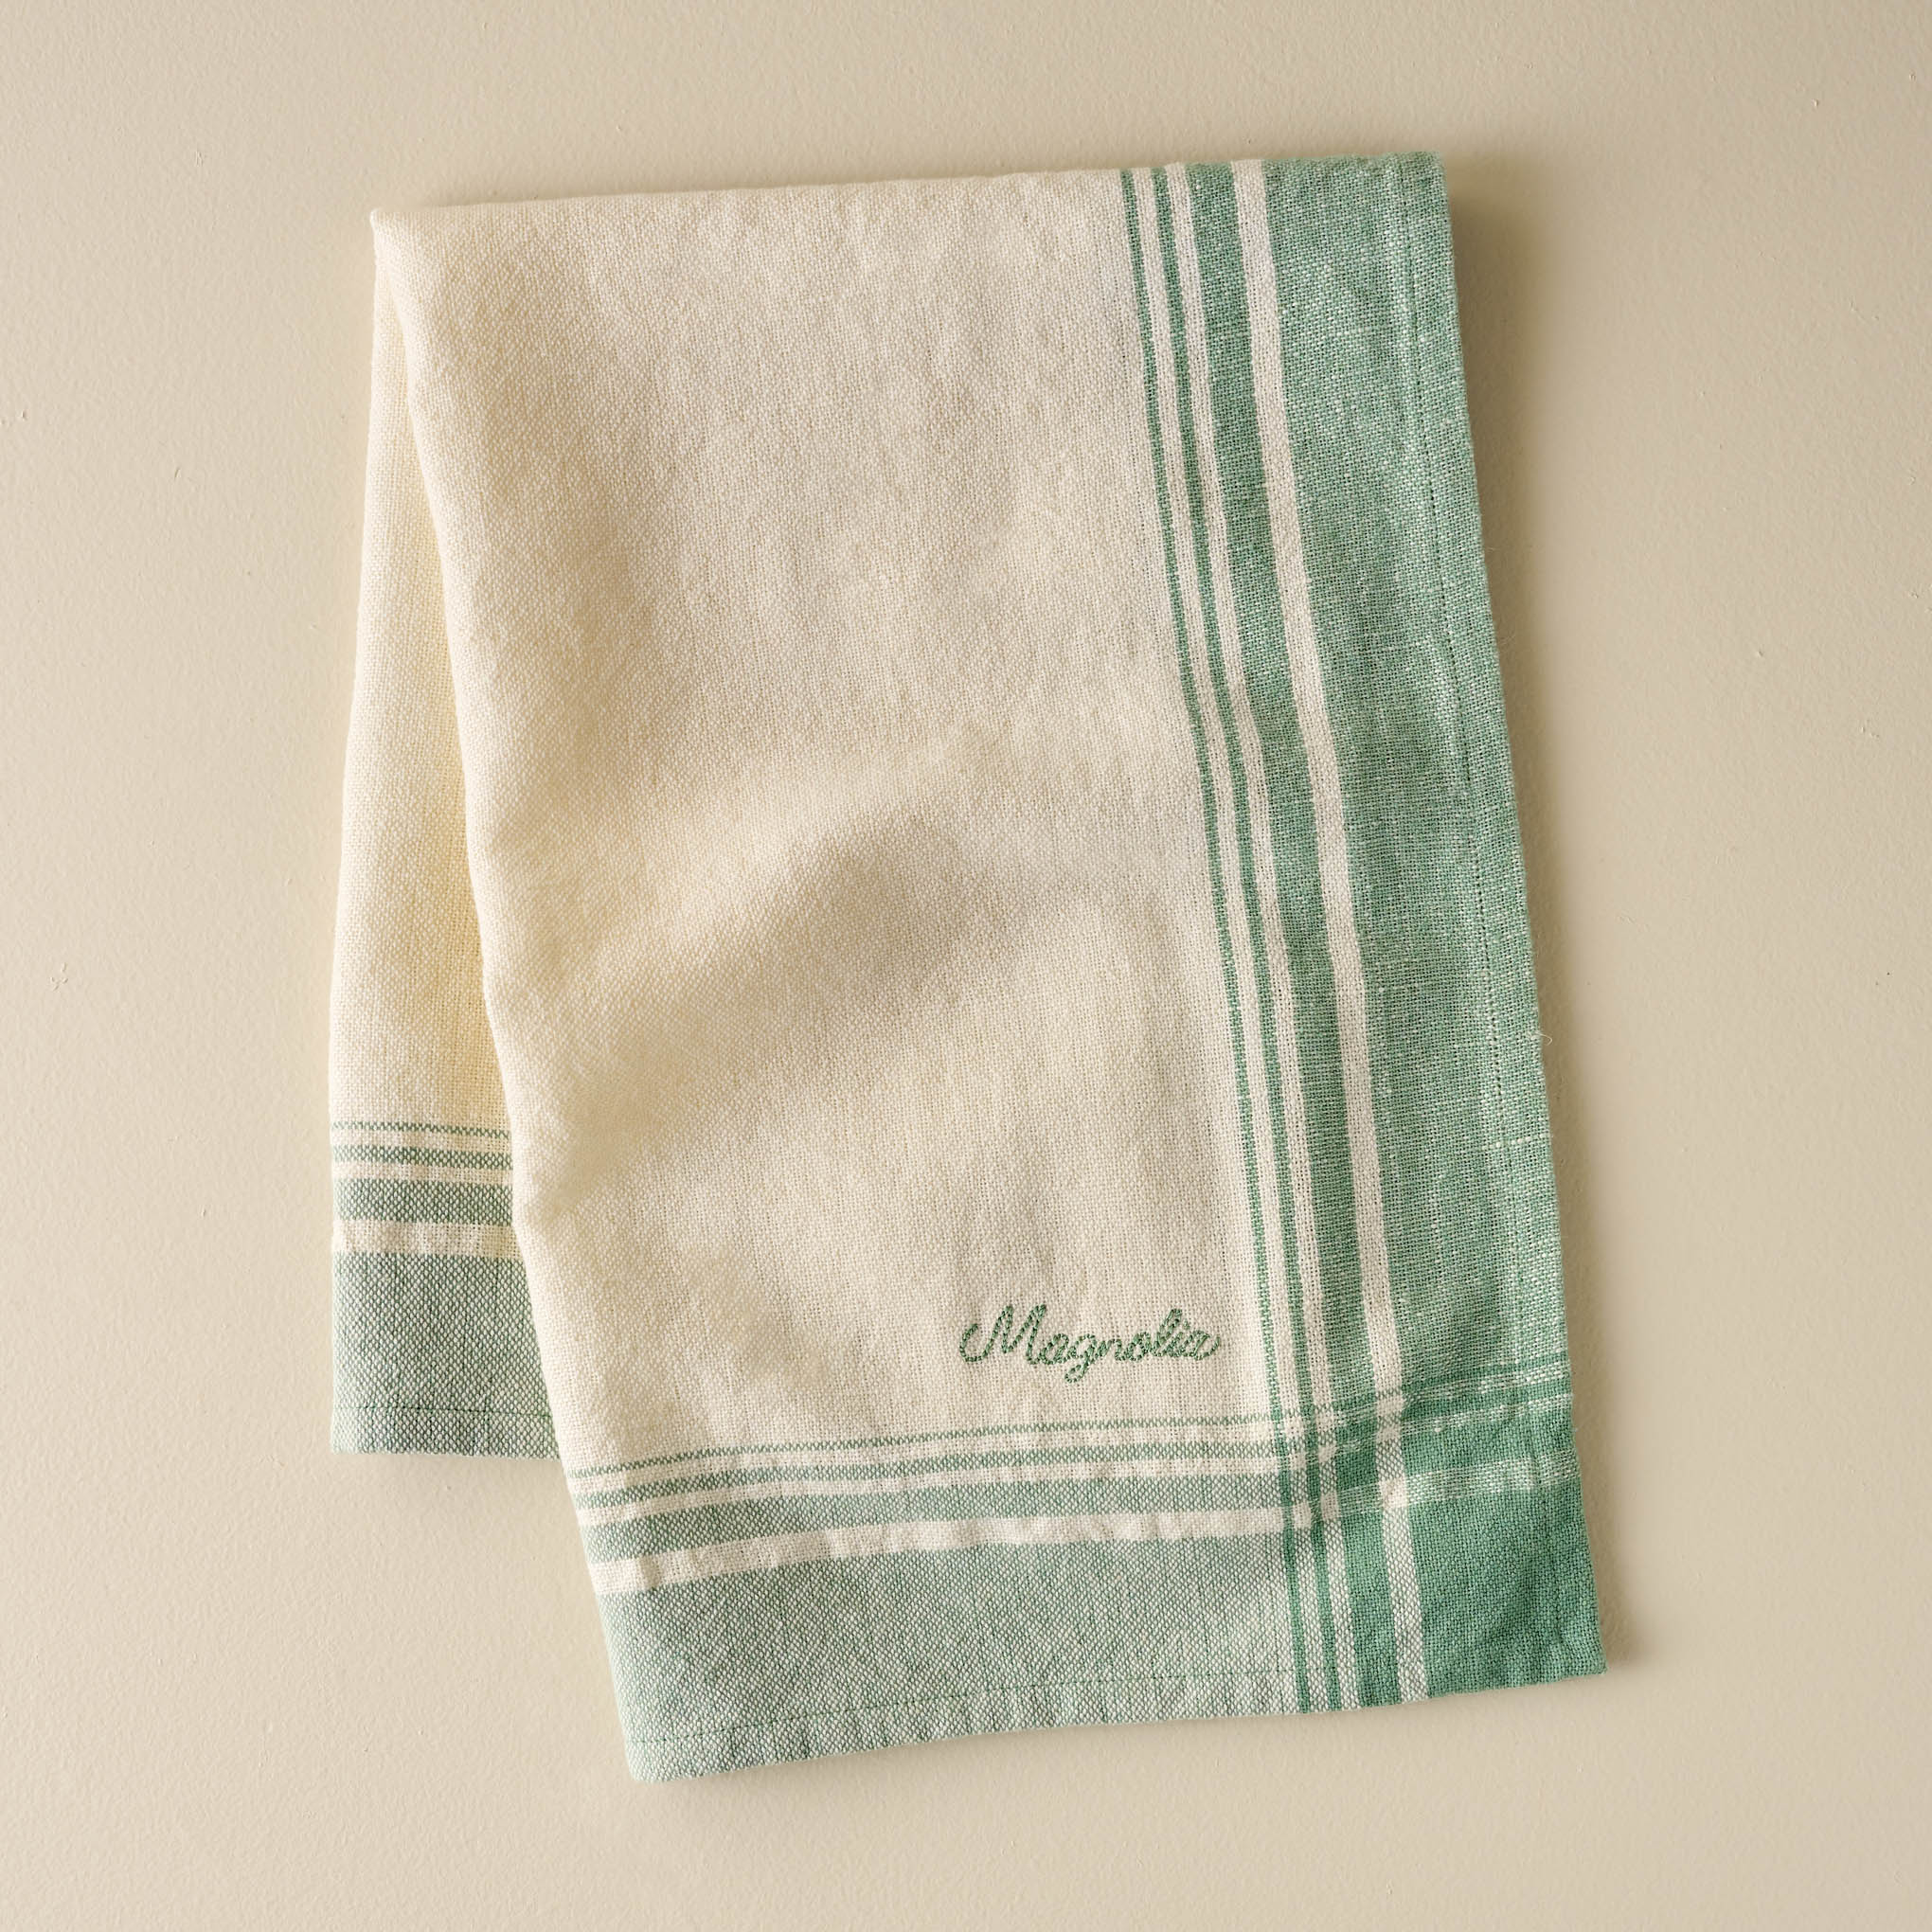 Magnolia Vintage Border Tea Towel On sale for $12.80, discounted from $16.00